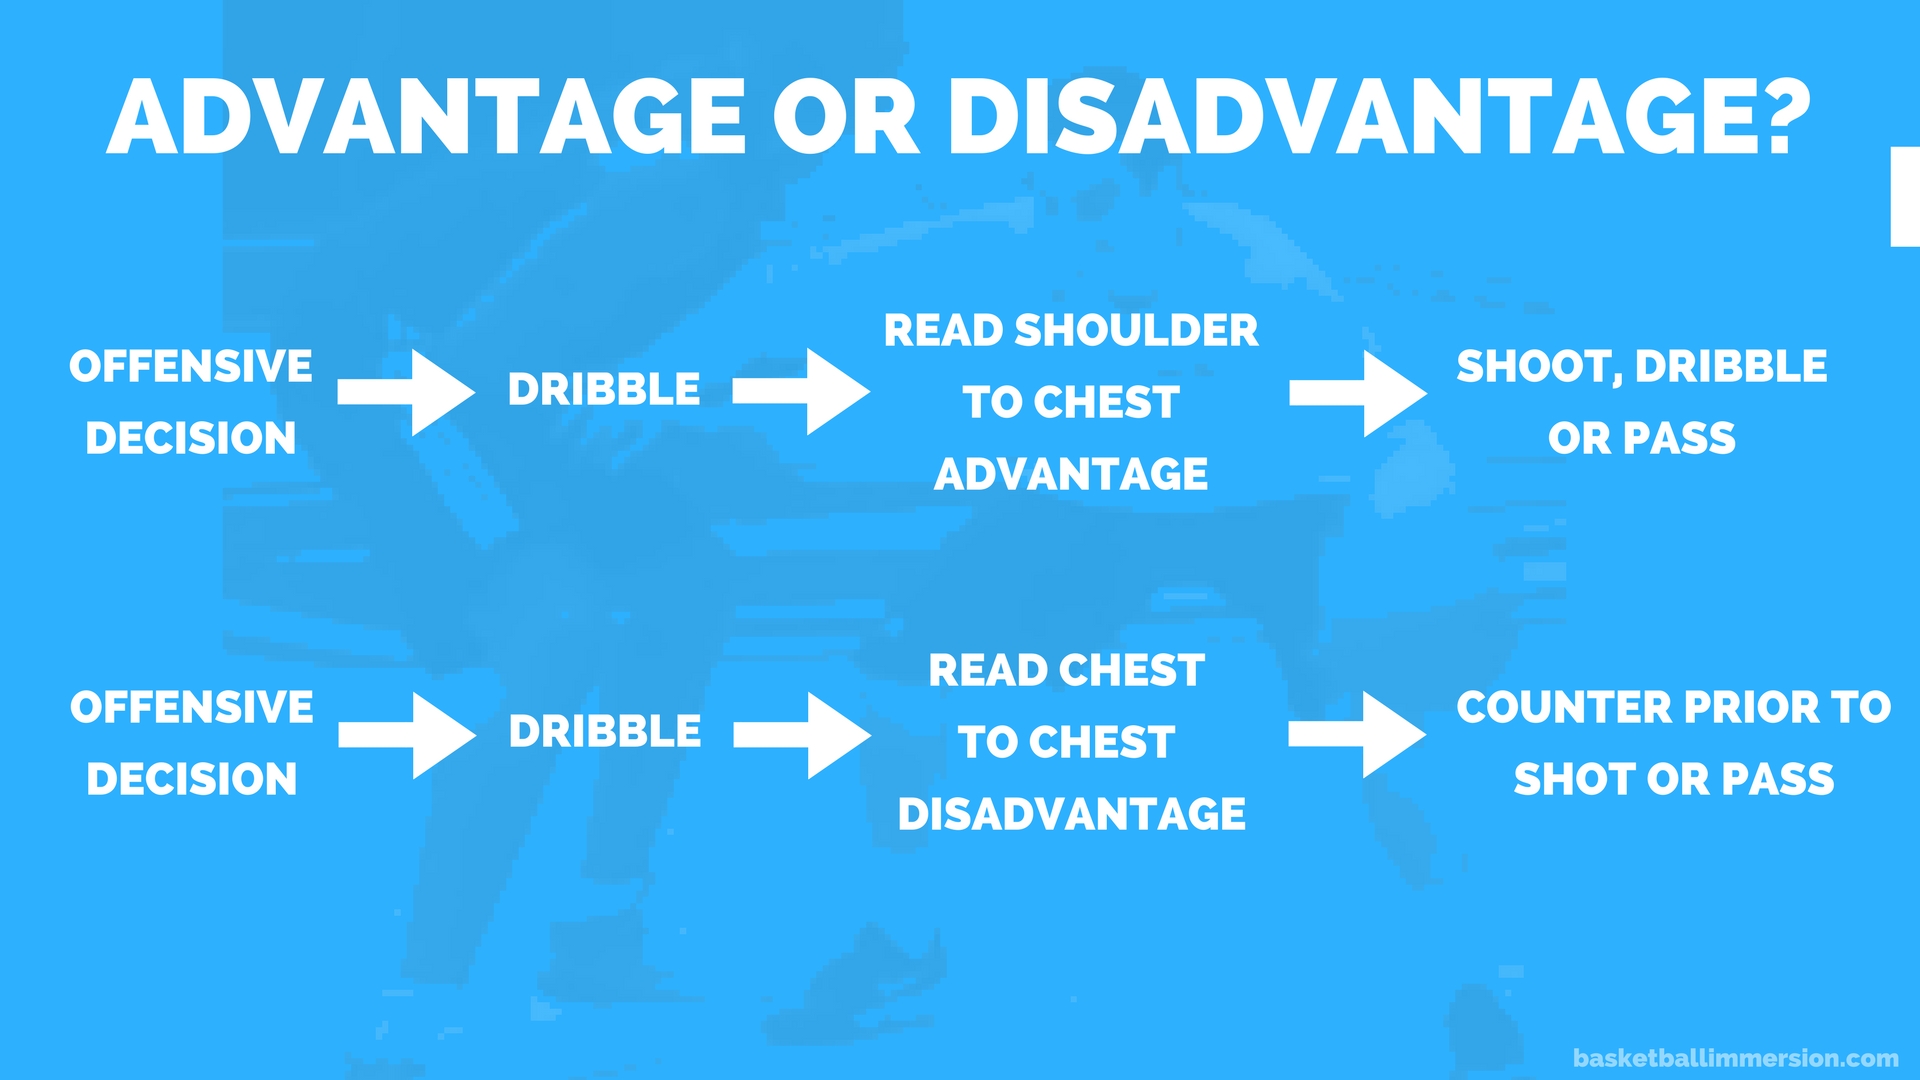 What are the Advantages And Disadvantages of Basketball?